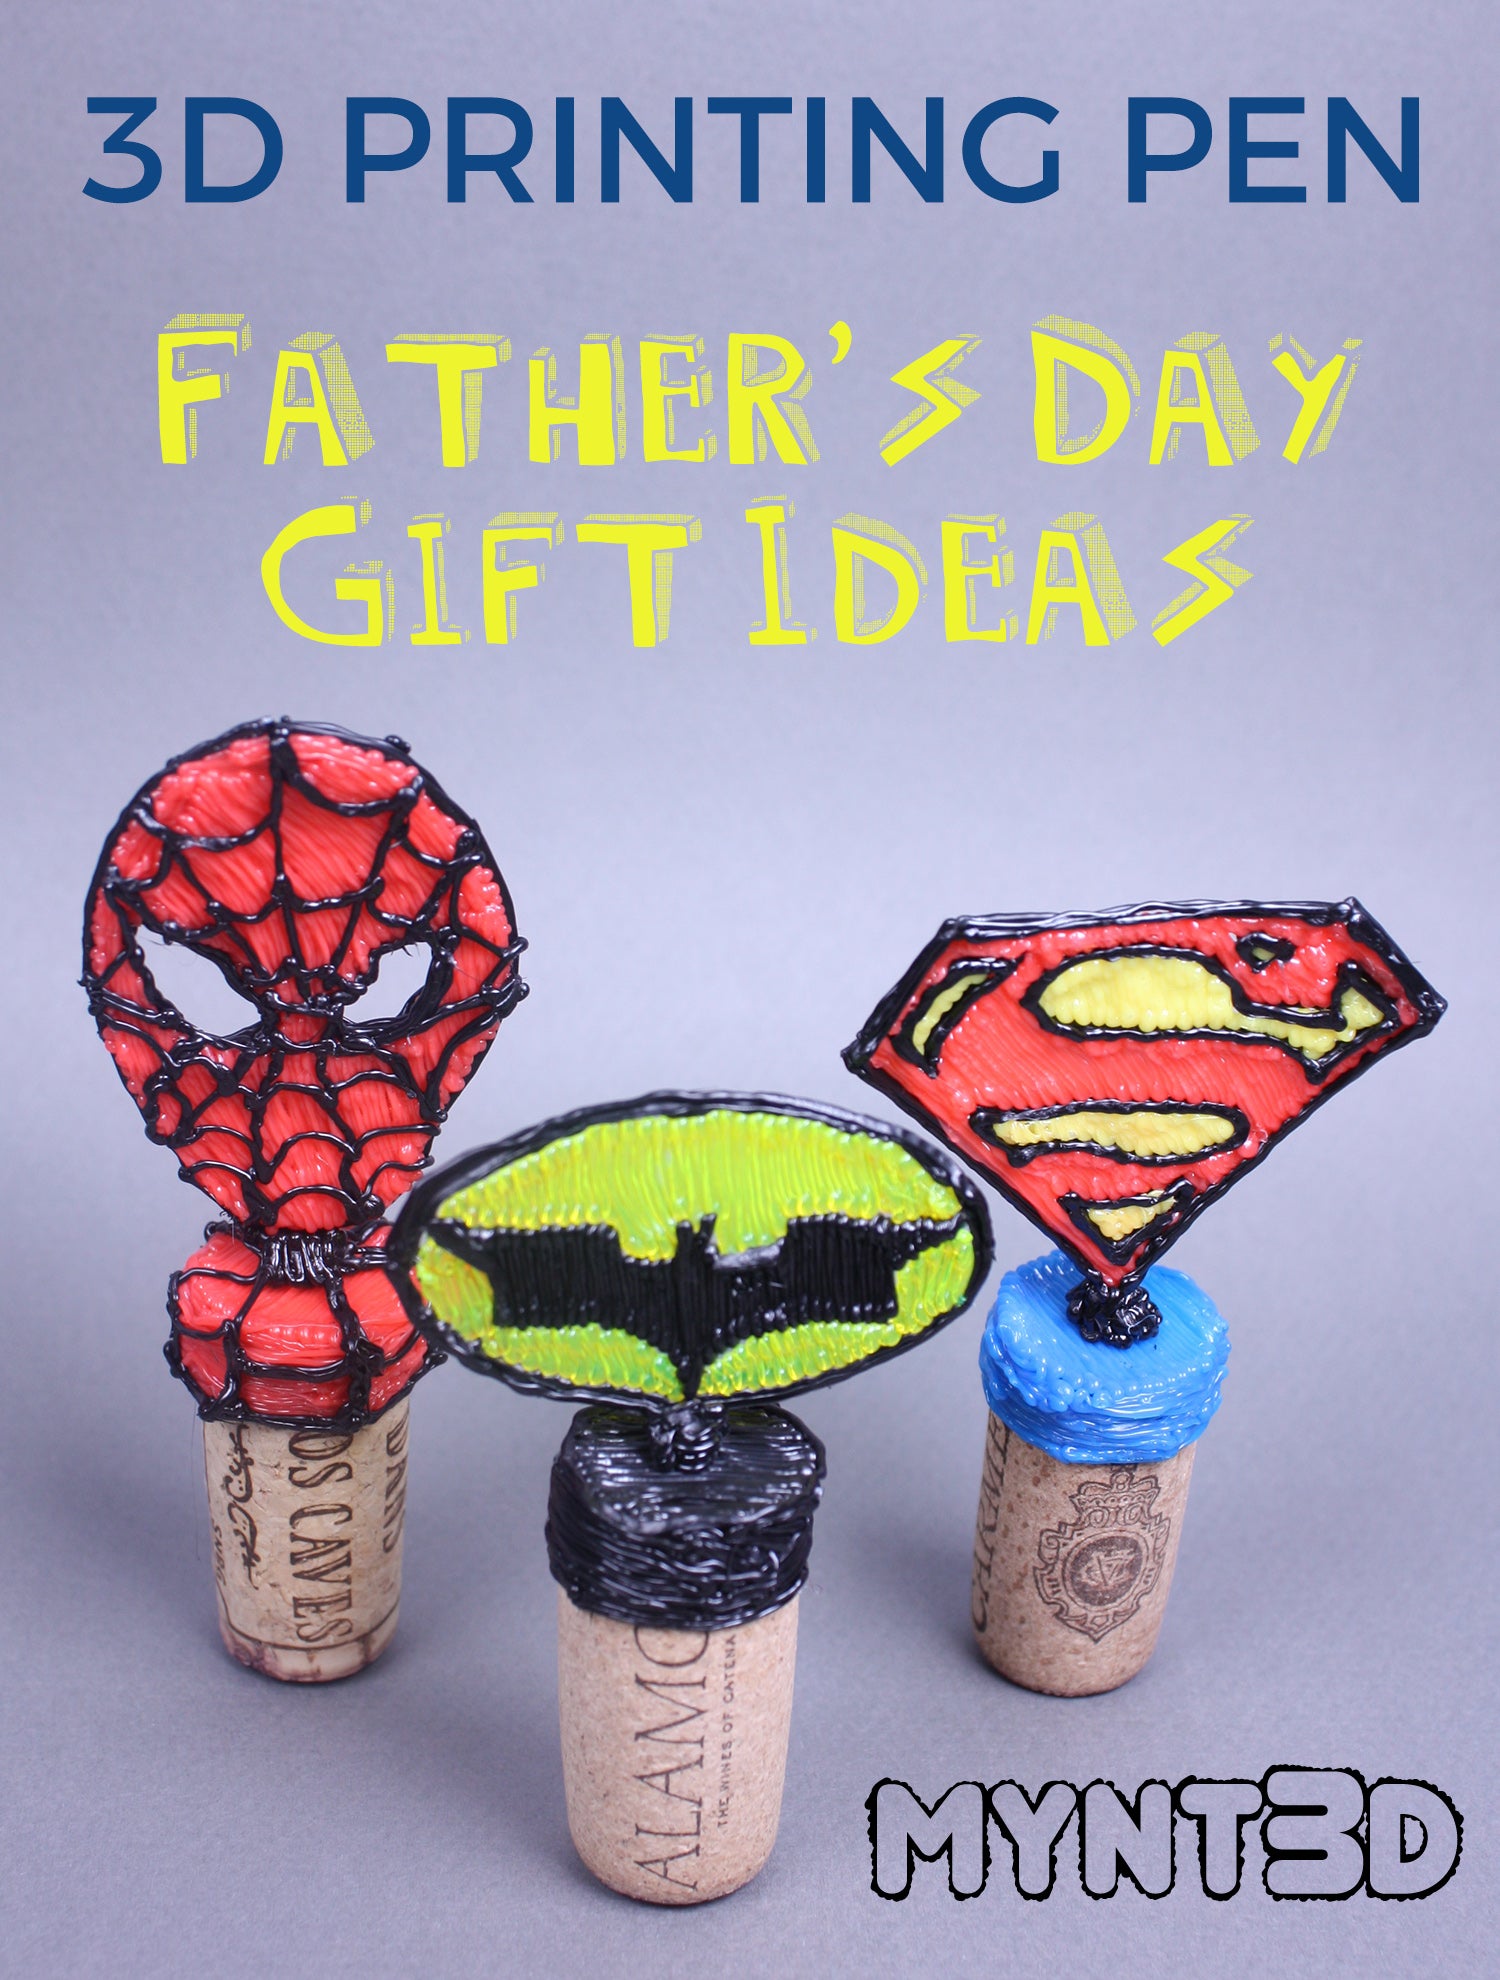 Father's Day Gift Ideas made with a 3D Pen